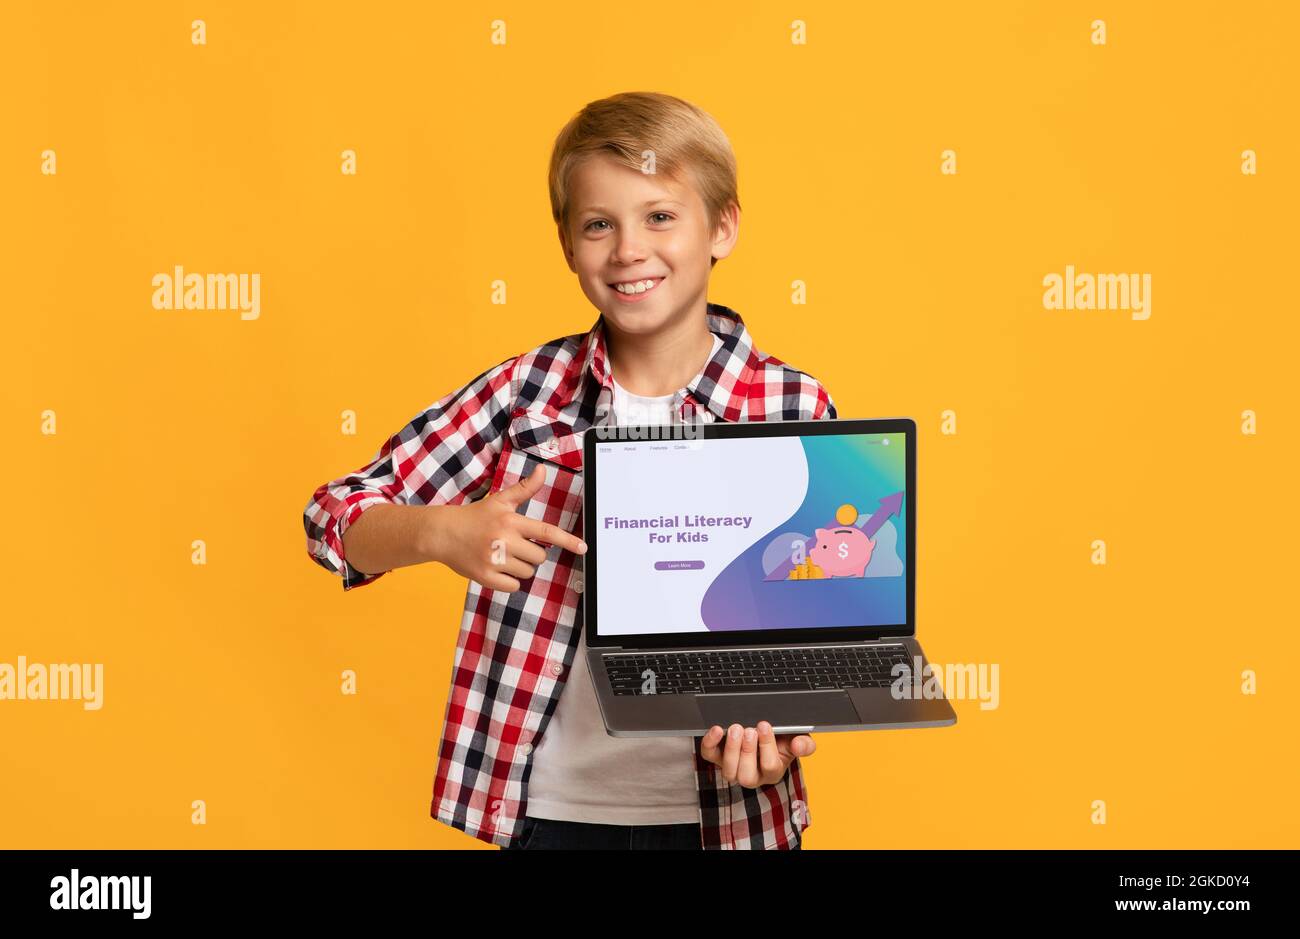 Smiling Caucasian boy pointing at laptop screen with Financial Literacy For Kids school website, orange background Stock Photo